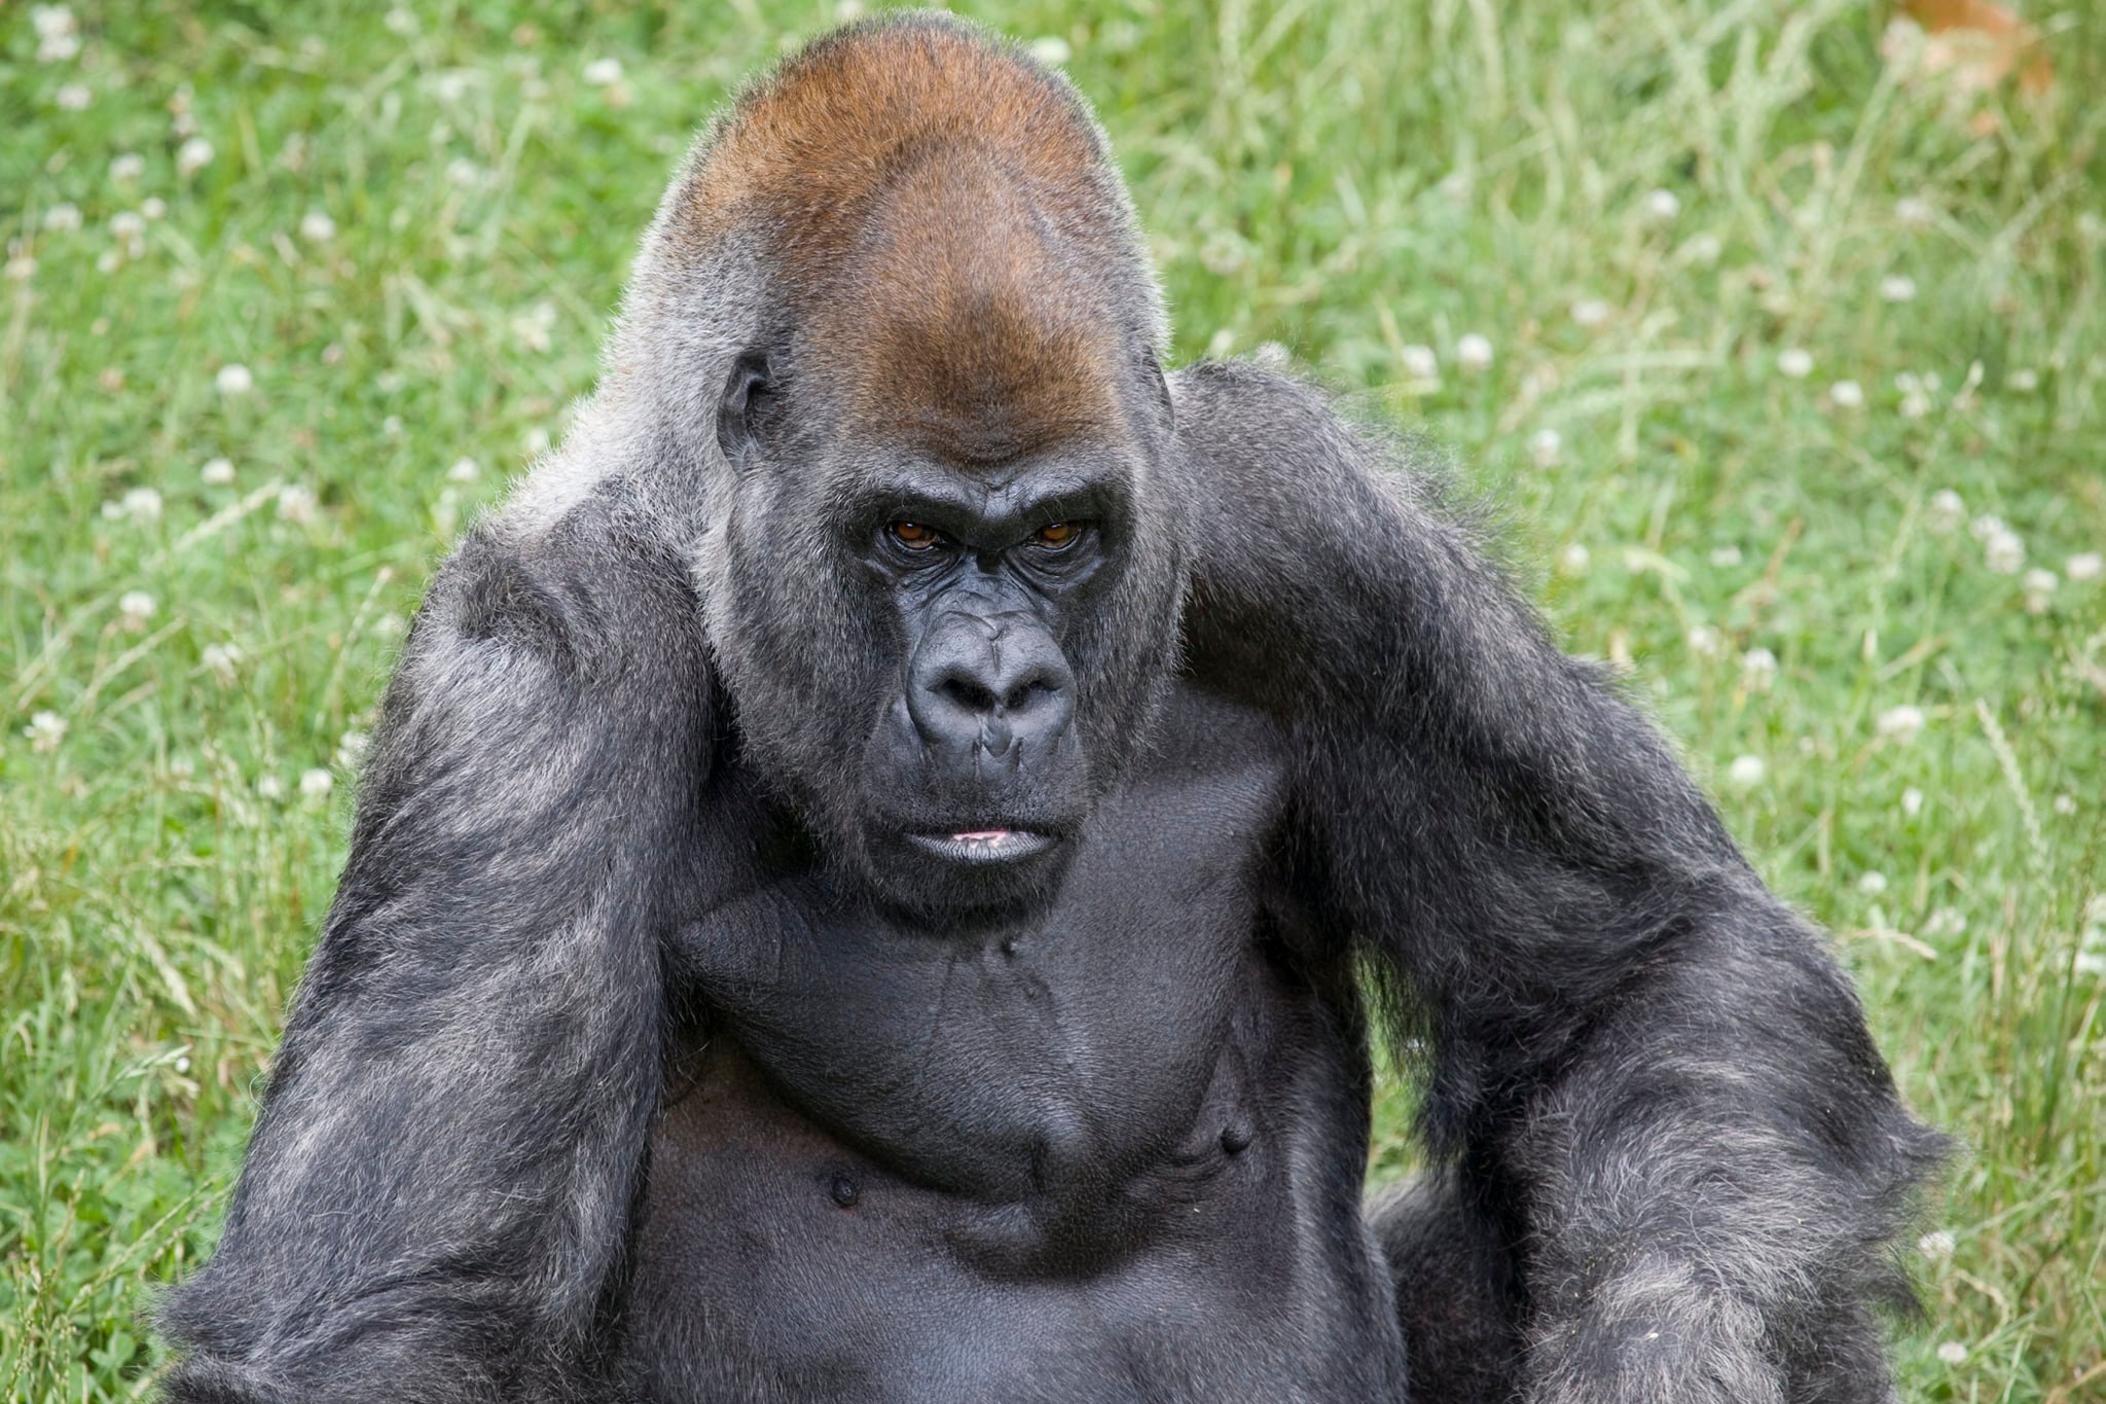 Ozzie the gorilla died at 61-years-old on Jan. 25, 2022. Ozzie was Zoo Atlanta's oldest gorilla and the third oldest gorilla in the world.